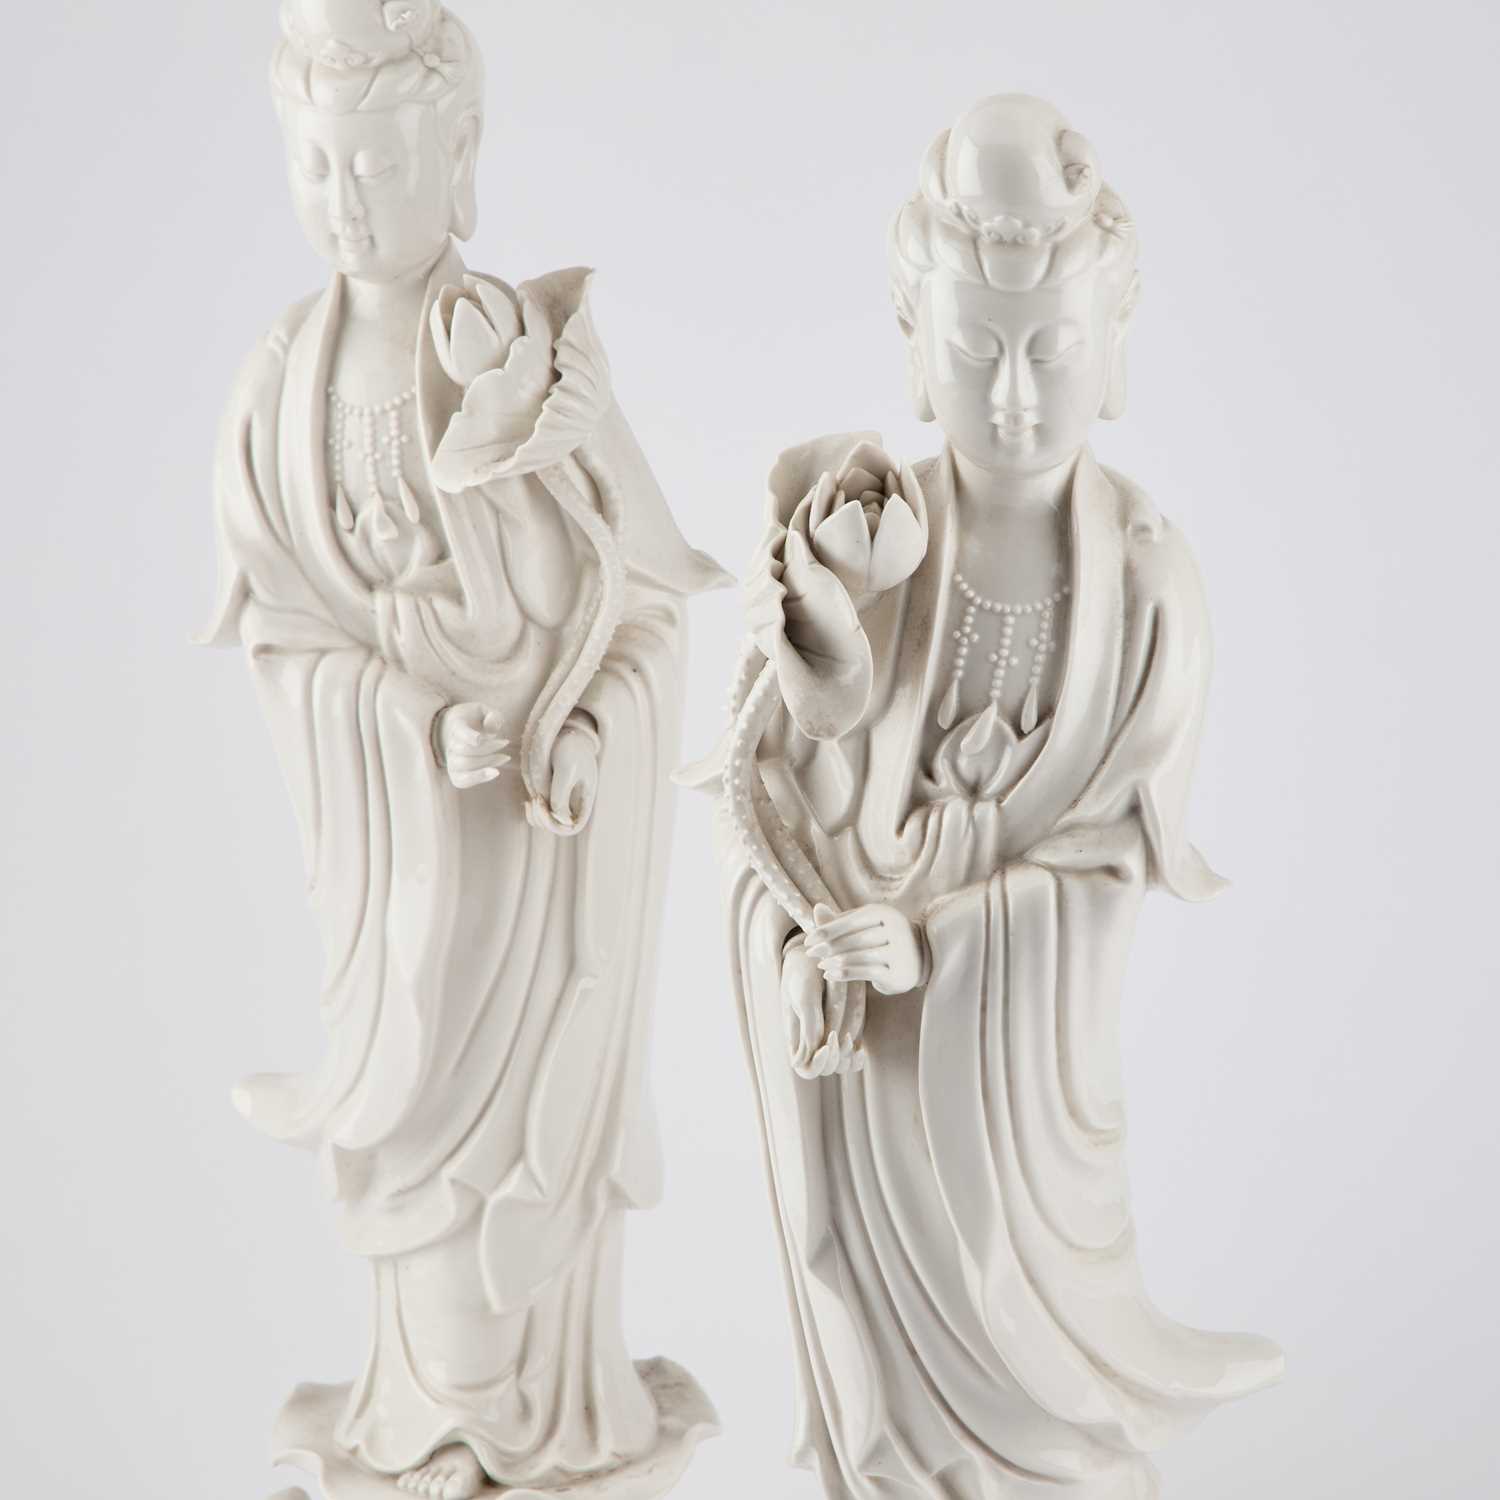 A LARGE PAIR OF CHINESE BLANC-DE-CHINE FIGURES OF GUANYIN - Image 3 of 3